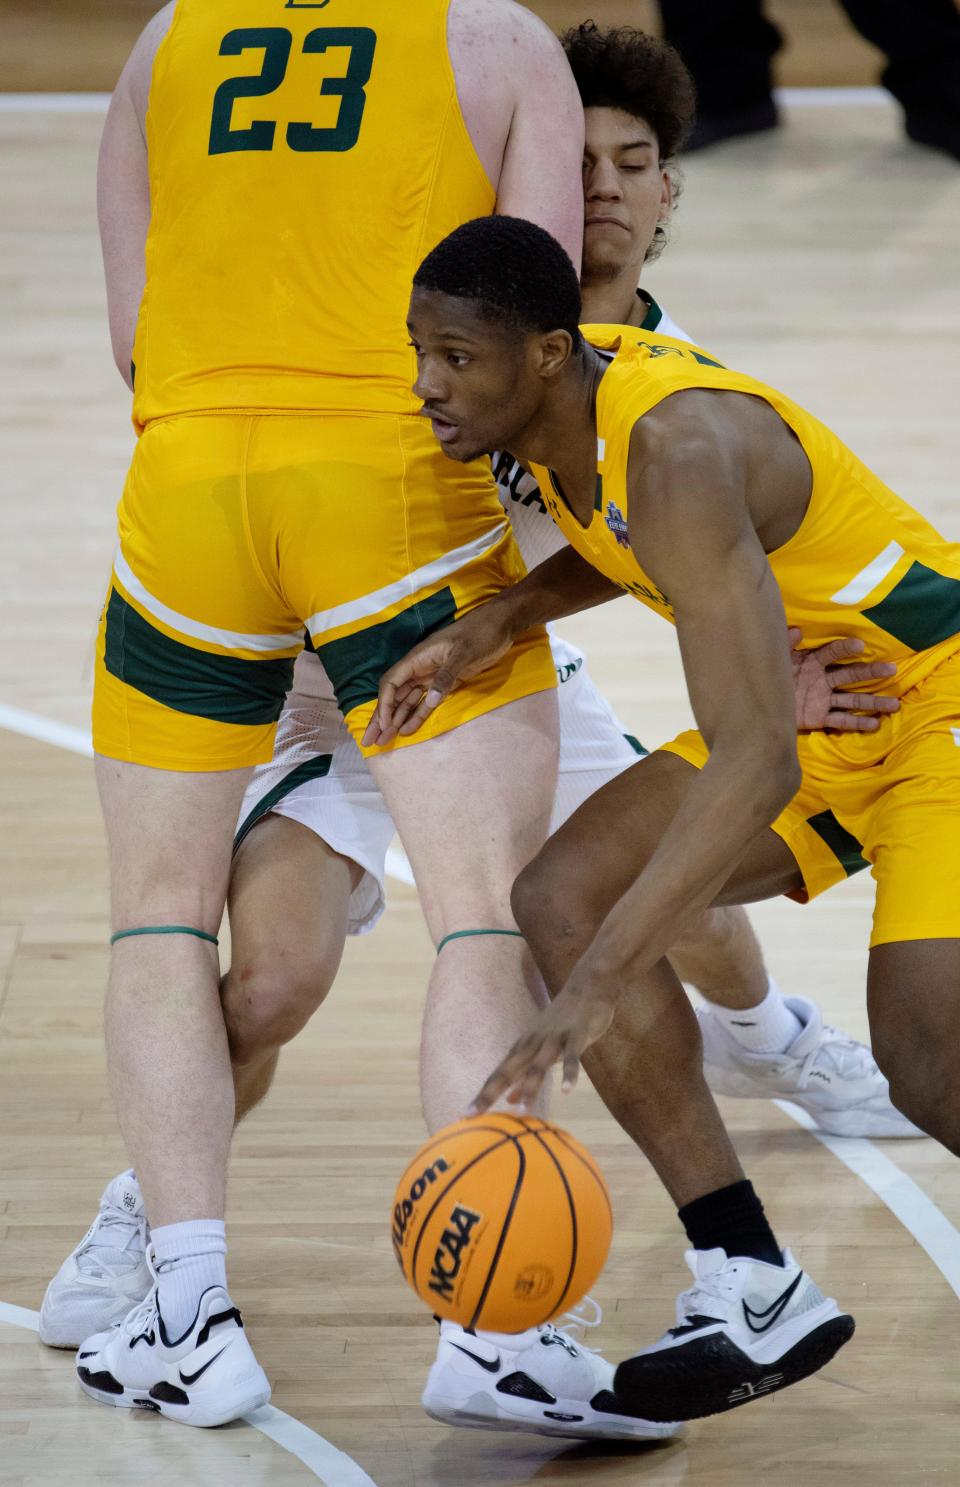 Black Hills State's Sindou Cisse (4) uses the pick of PJ Hayes (23) to elude Northwest Missouri's Diego Bernard (1) during their semifinal game of the 2022 NCAA DII Men's Basketball Championship Elite Eight at Ford Center in Evansville, Ind., Thursday, March 24, 2022.